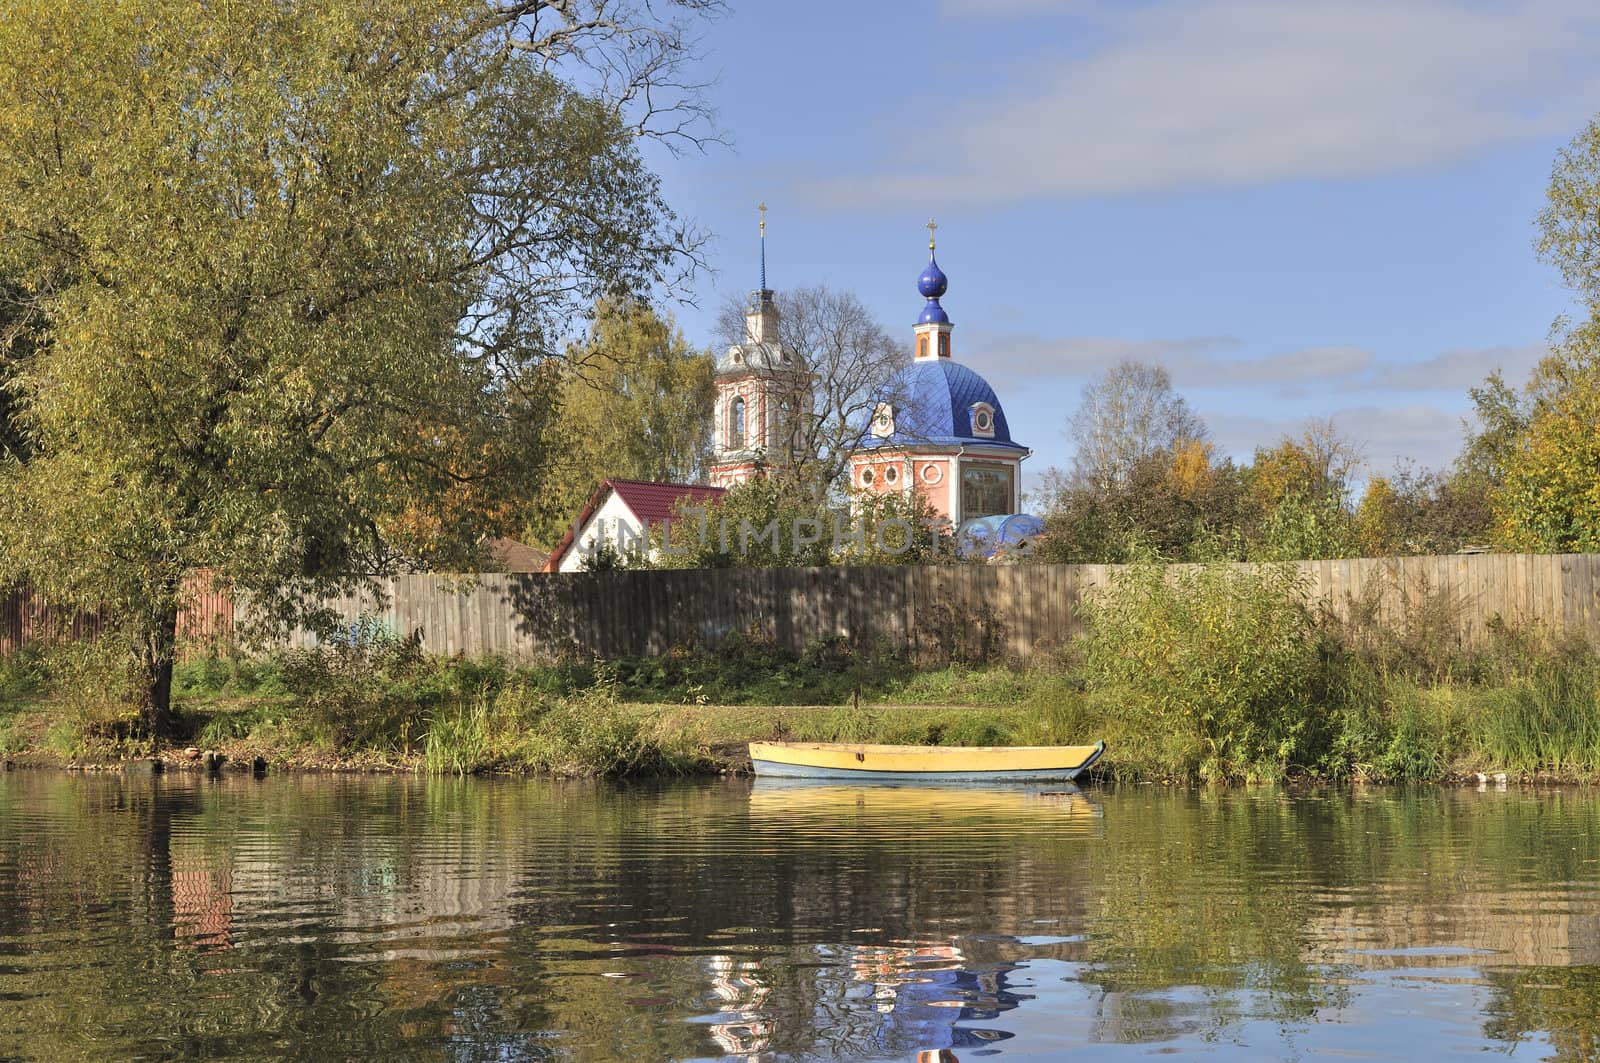 River bank with yellow wooden boat and church on background in Pereslavl-Zalessky, Russia